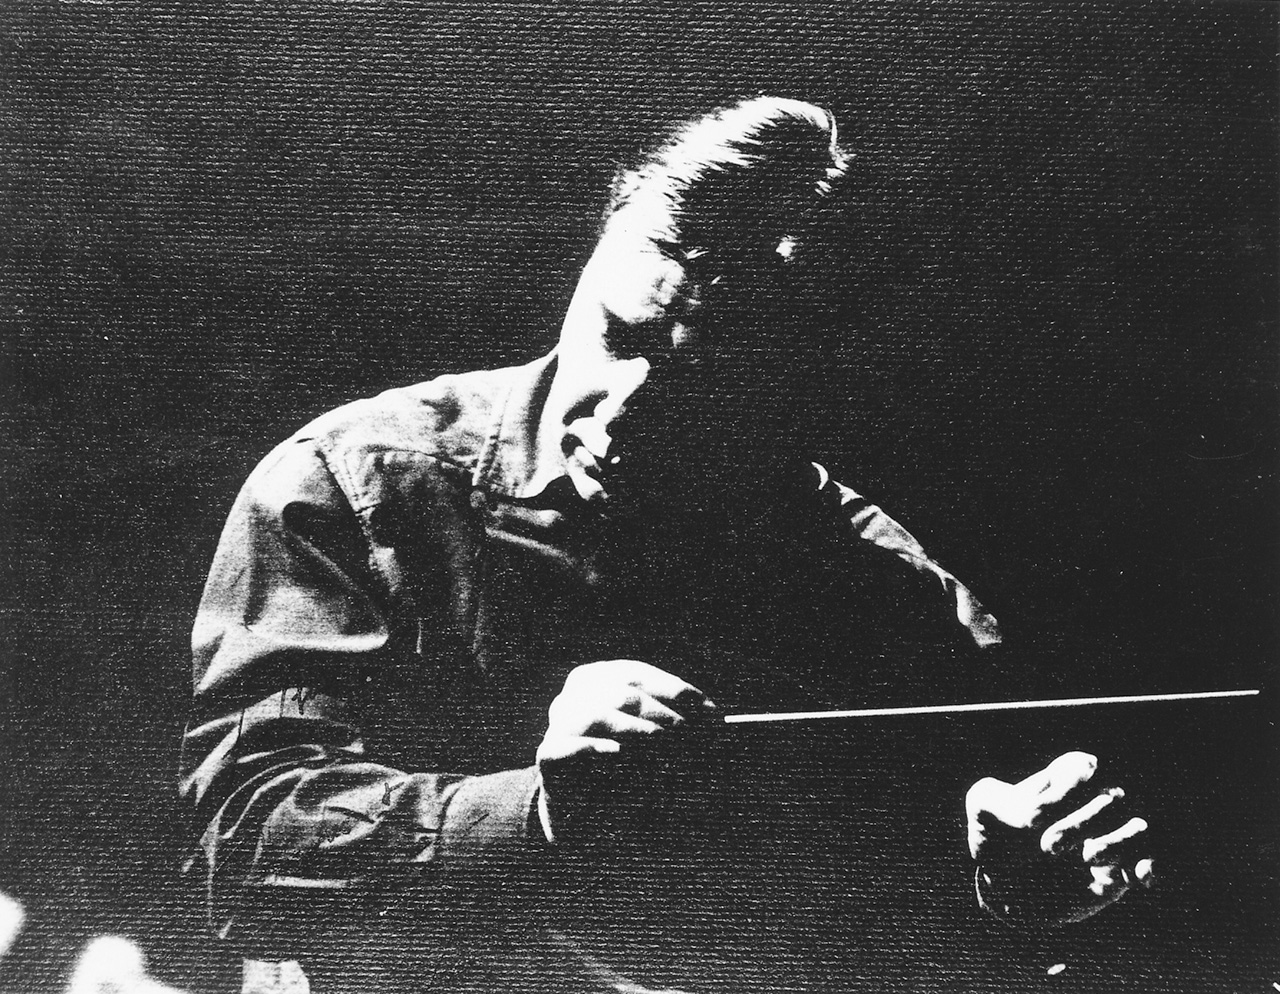 A man in shadow, conducting with a baton.